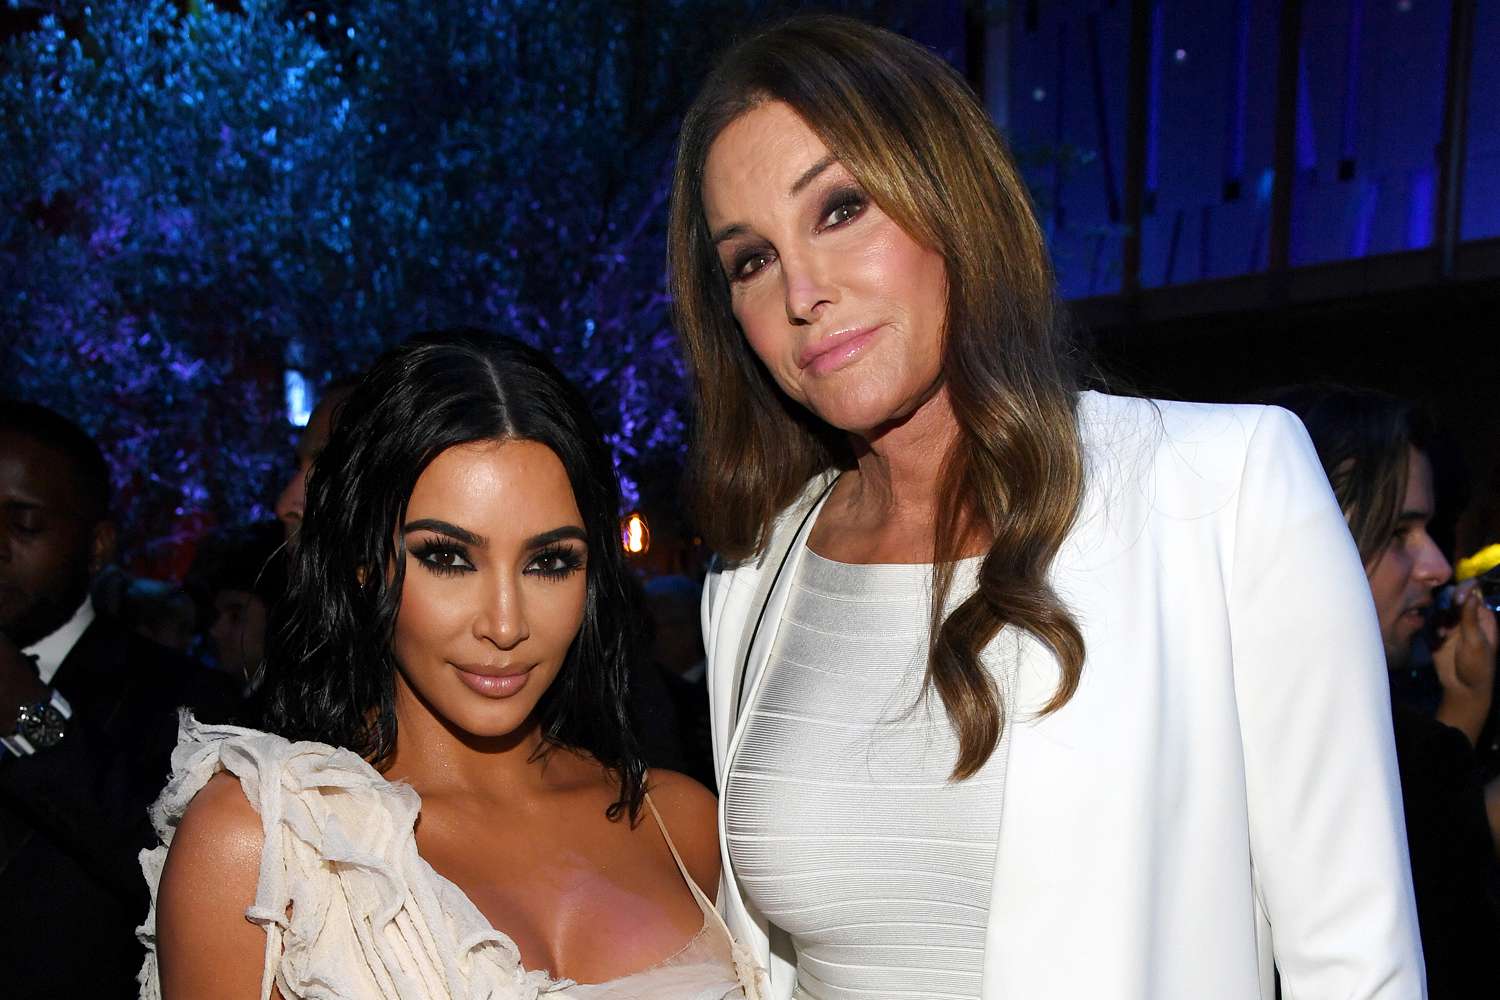 Kim Kardashian Watches Caitlyn Jenner's Episode of Netflix Series Untold: 'This Doc Though!' - PEOPLE